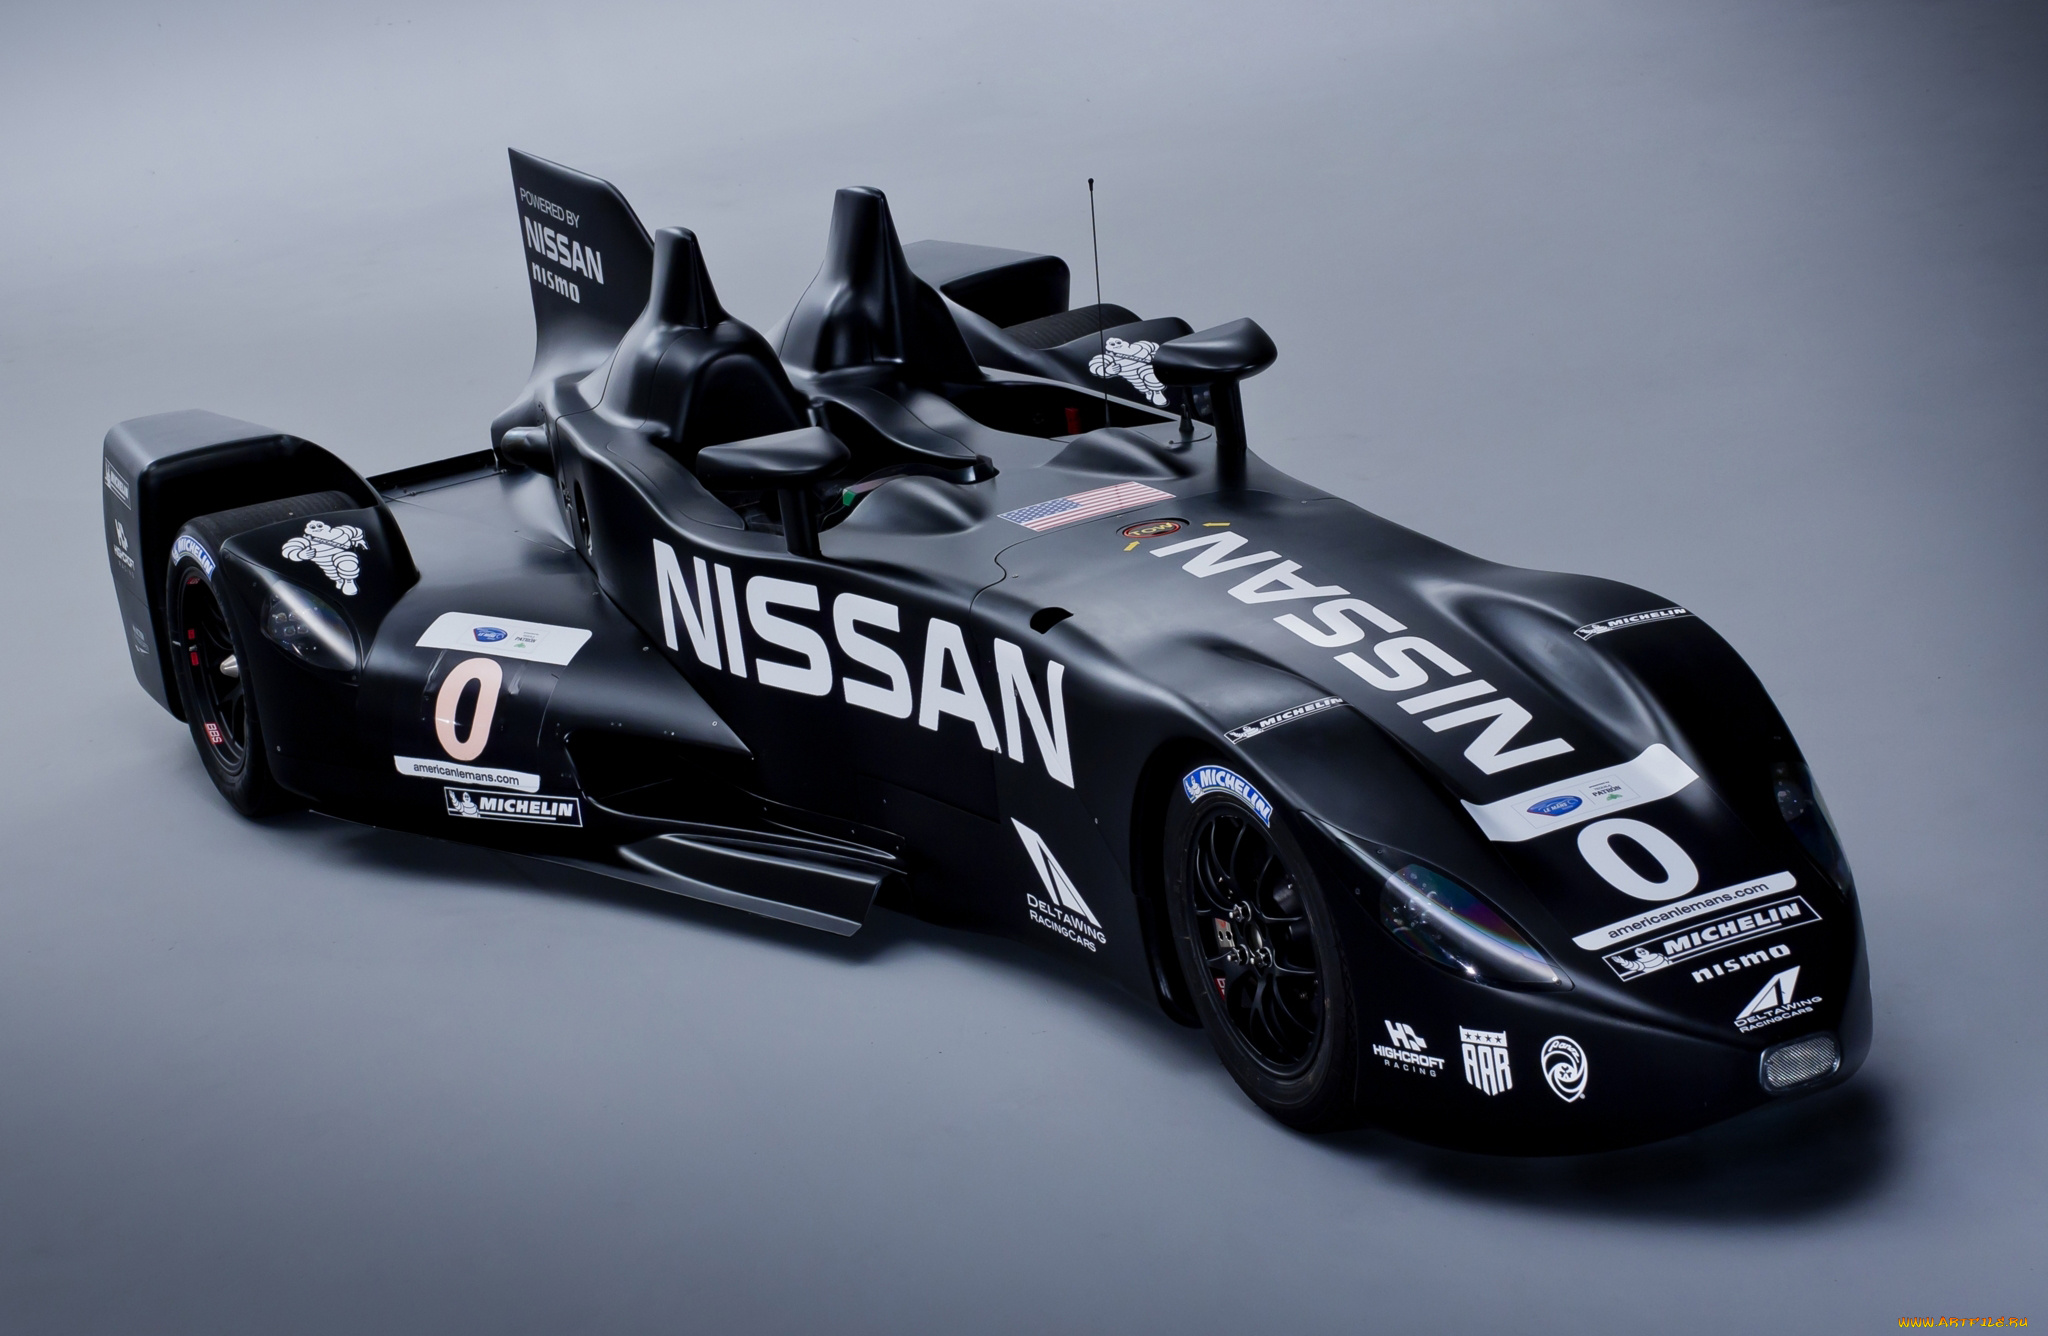 nissan, deltawing, experimental, race, car, 2012, автомобили, nissan, datsun, race, experimental, 2012, car, deltawing